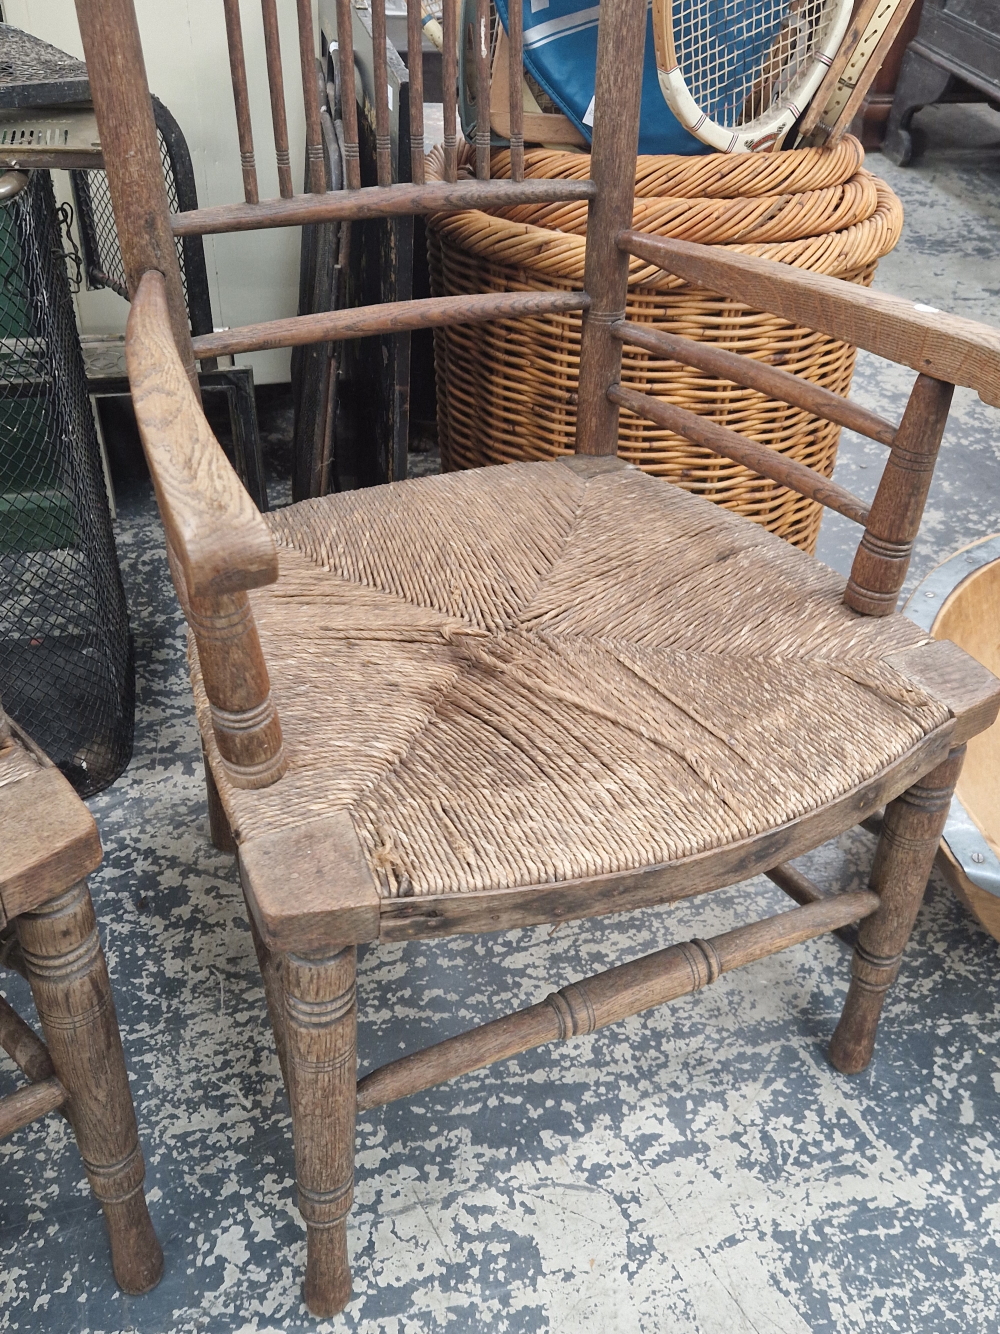 TWO WILLIAM MORRIS STYLE OAK ELBOW CHAIRS WITH RUSH SEATS - Image 3 of 3